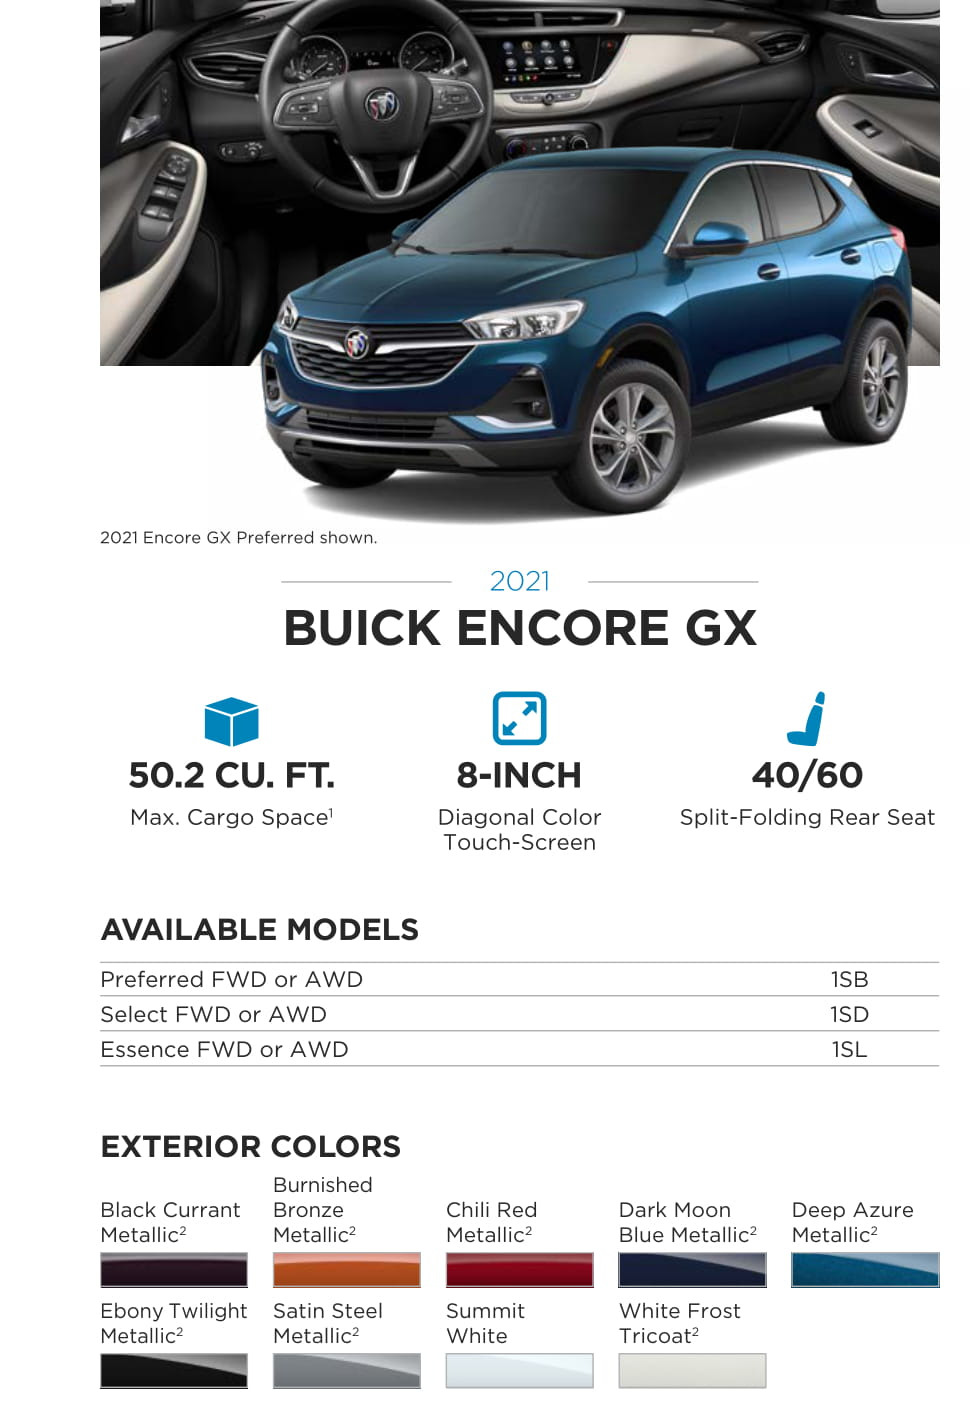 Exterior Colors used on this model Buick in 2021